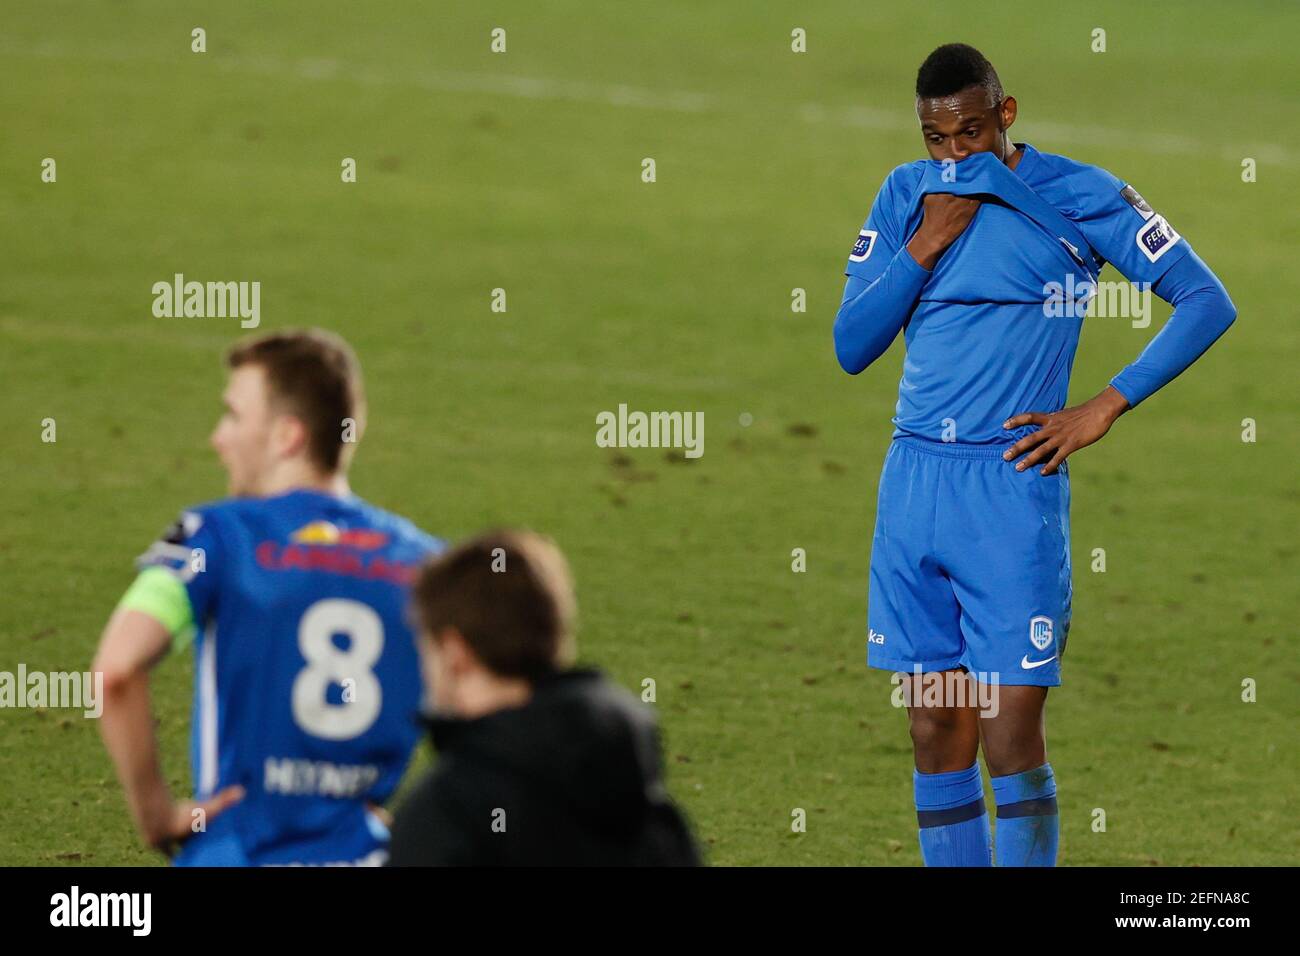 Genk's Jhon Lucumi Bonilla looks dejected after a soccer match between KV Oostende and KRC Genk, Wednesday 17 February 2021 in Oostende, a postponed g Stock Photo